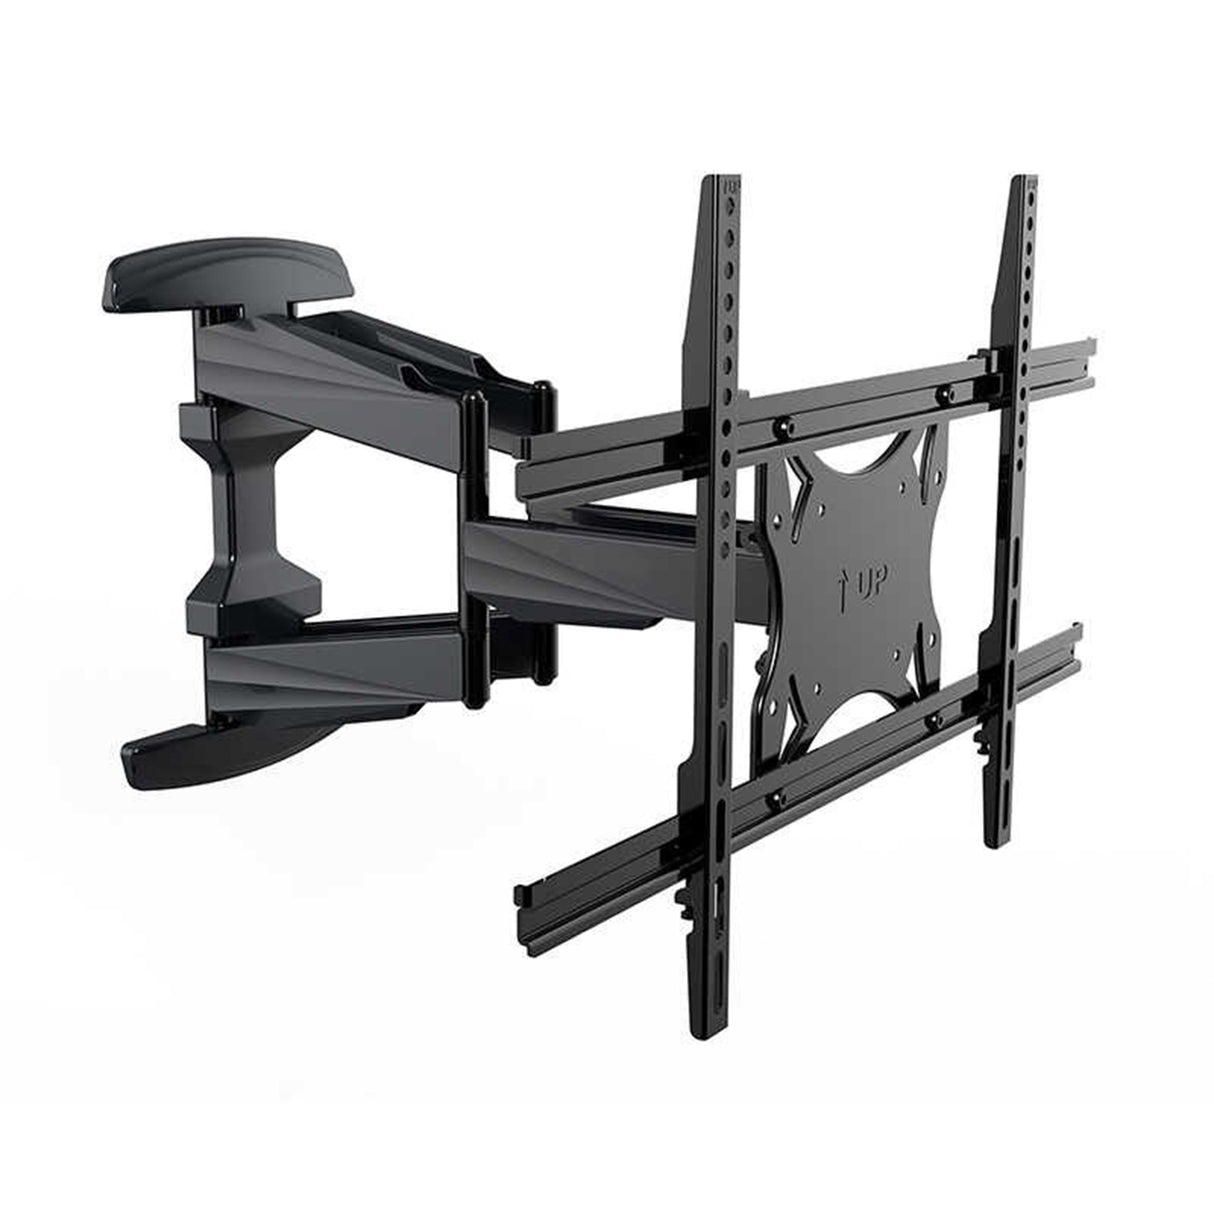 TV Mount NB- P4 Full Motion Cantilever TV Mount, 32 to 55 inches Support /400 x 400 mm